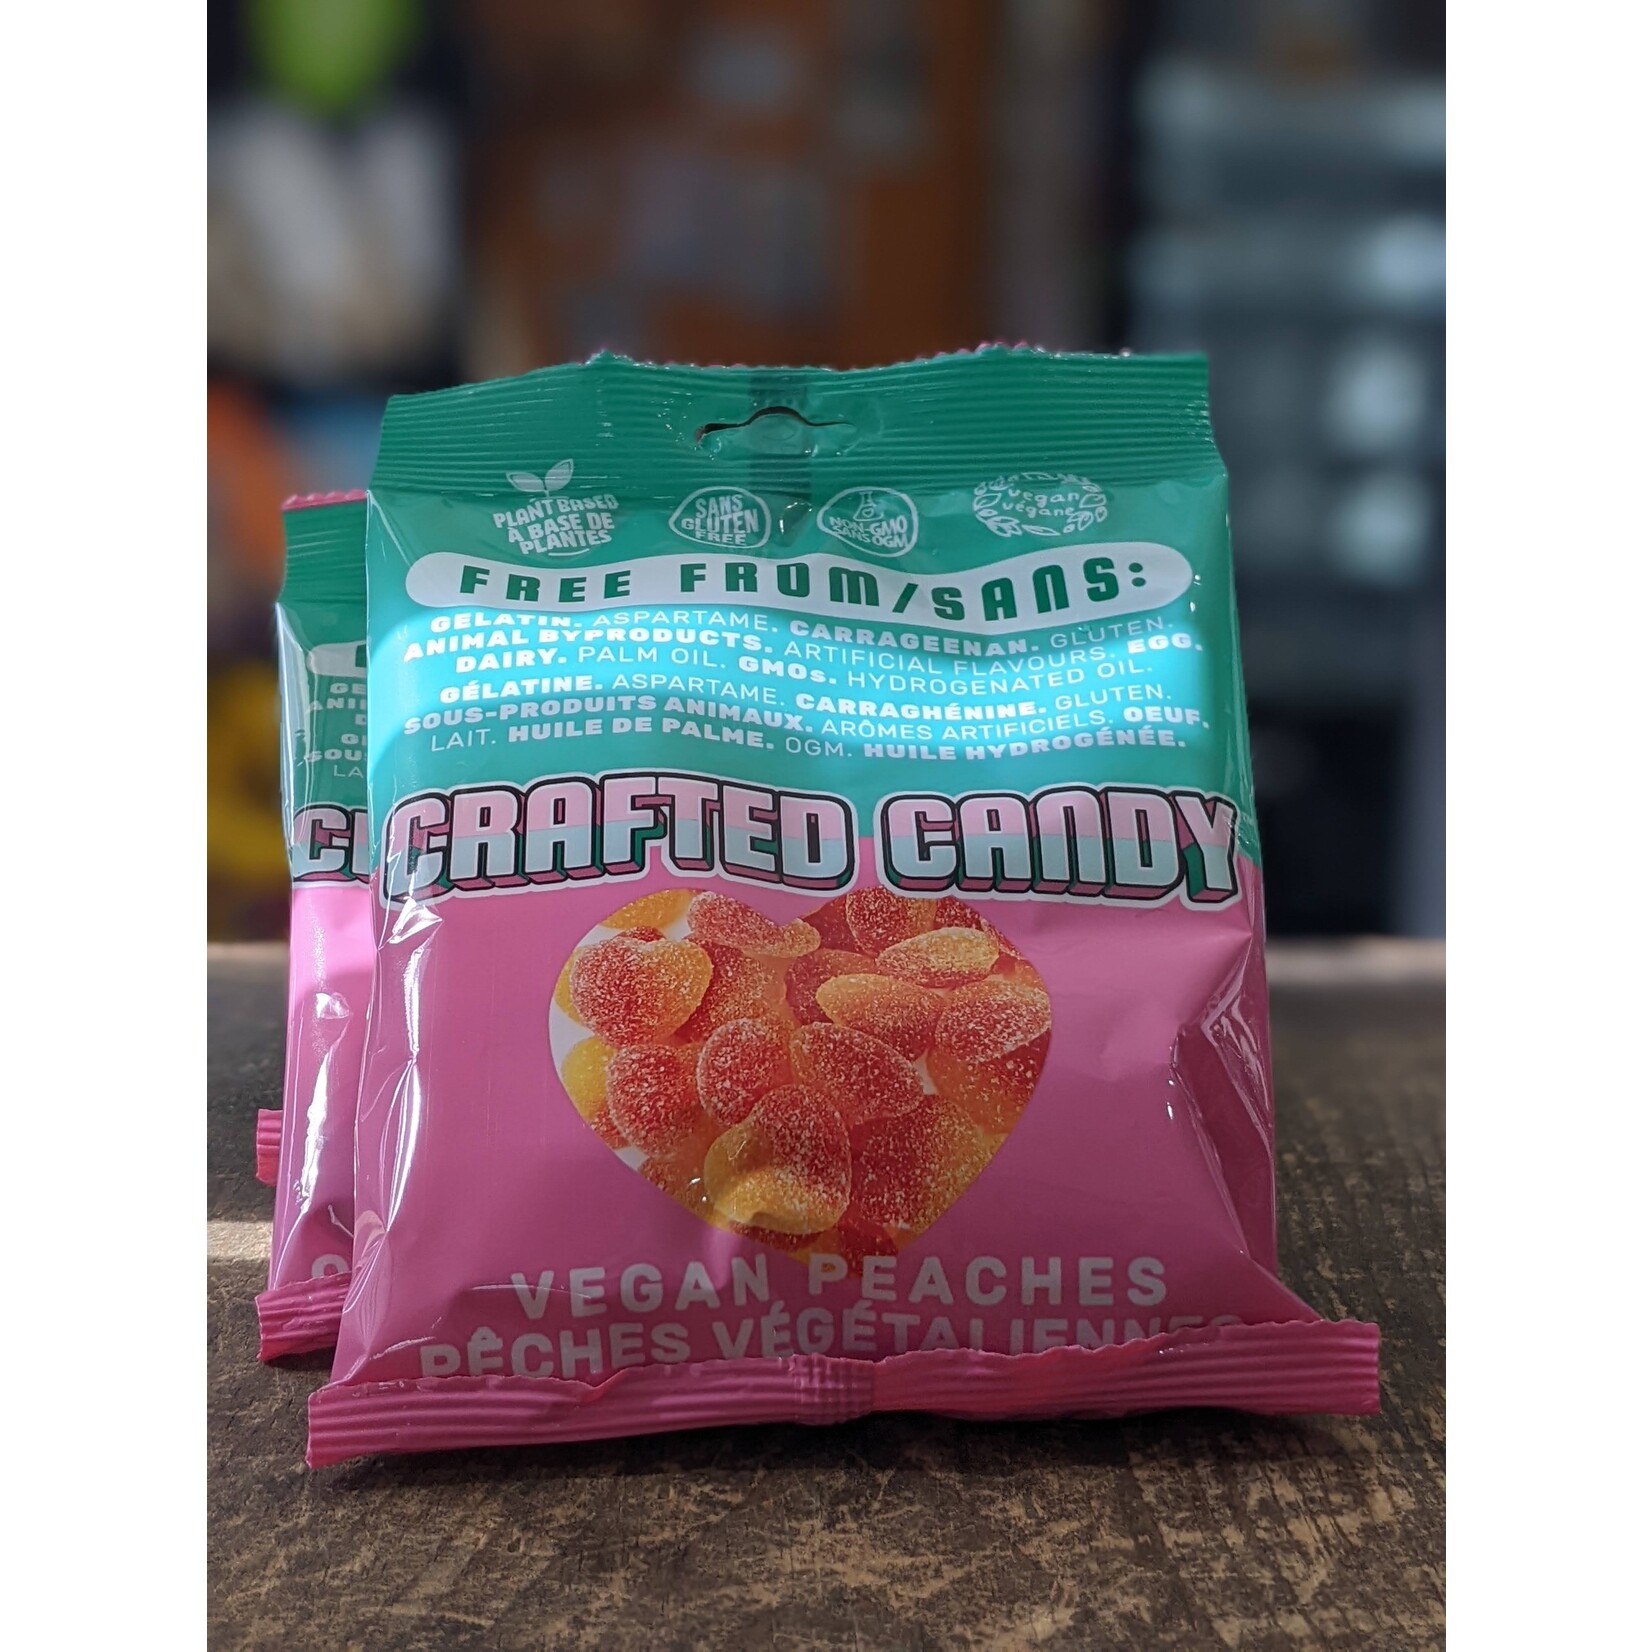 URBANI FOODS CRAFTED CANDY VEGAN PEACHES